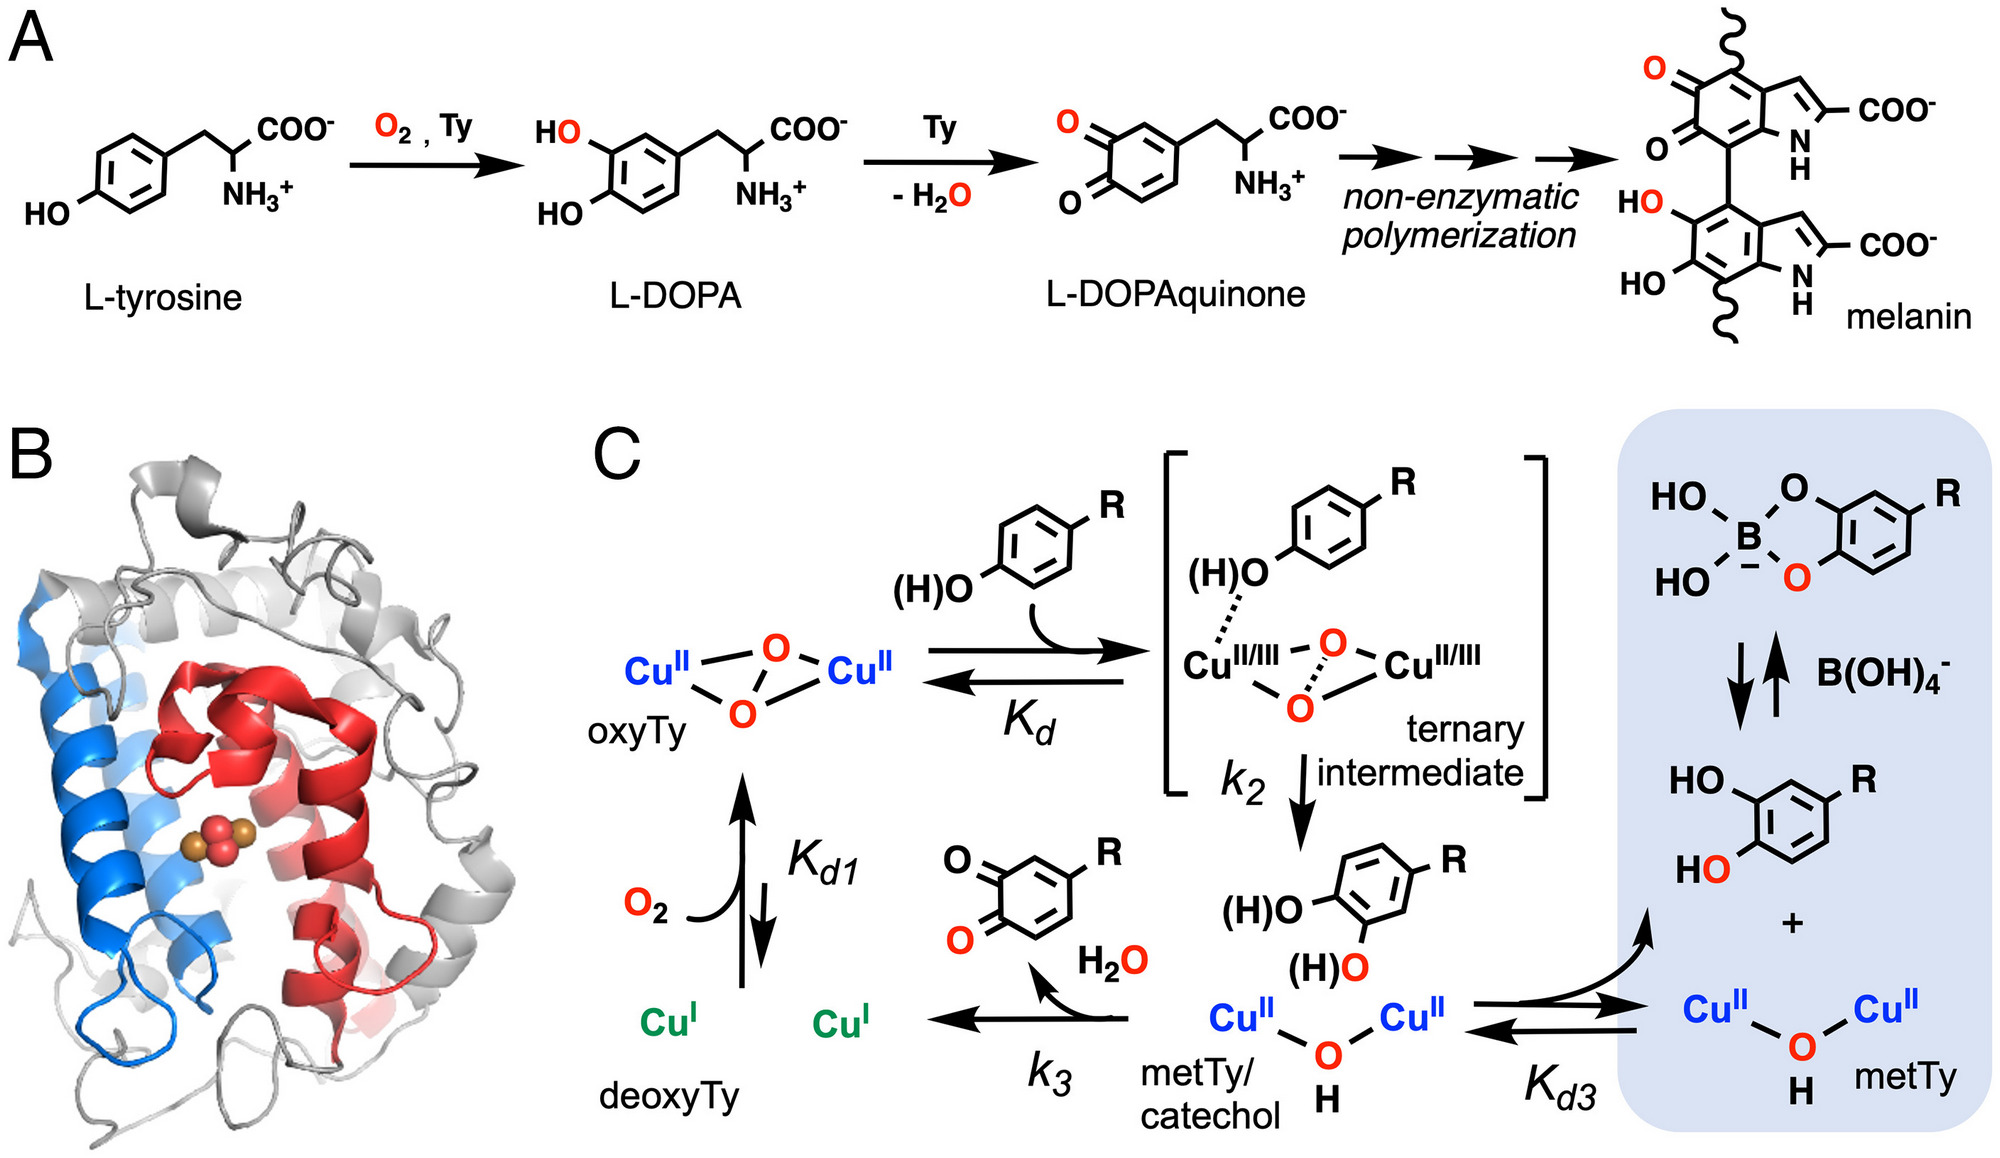 A step toward understanding the oxygen activation by copper containing enzymes